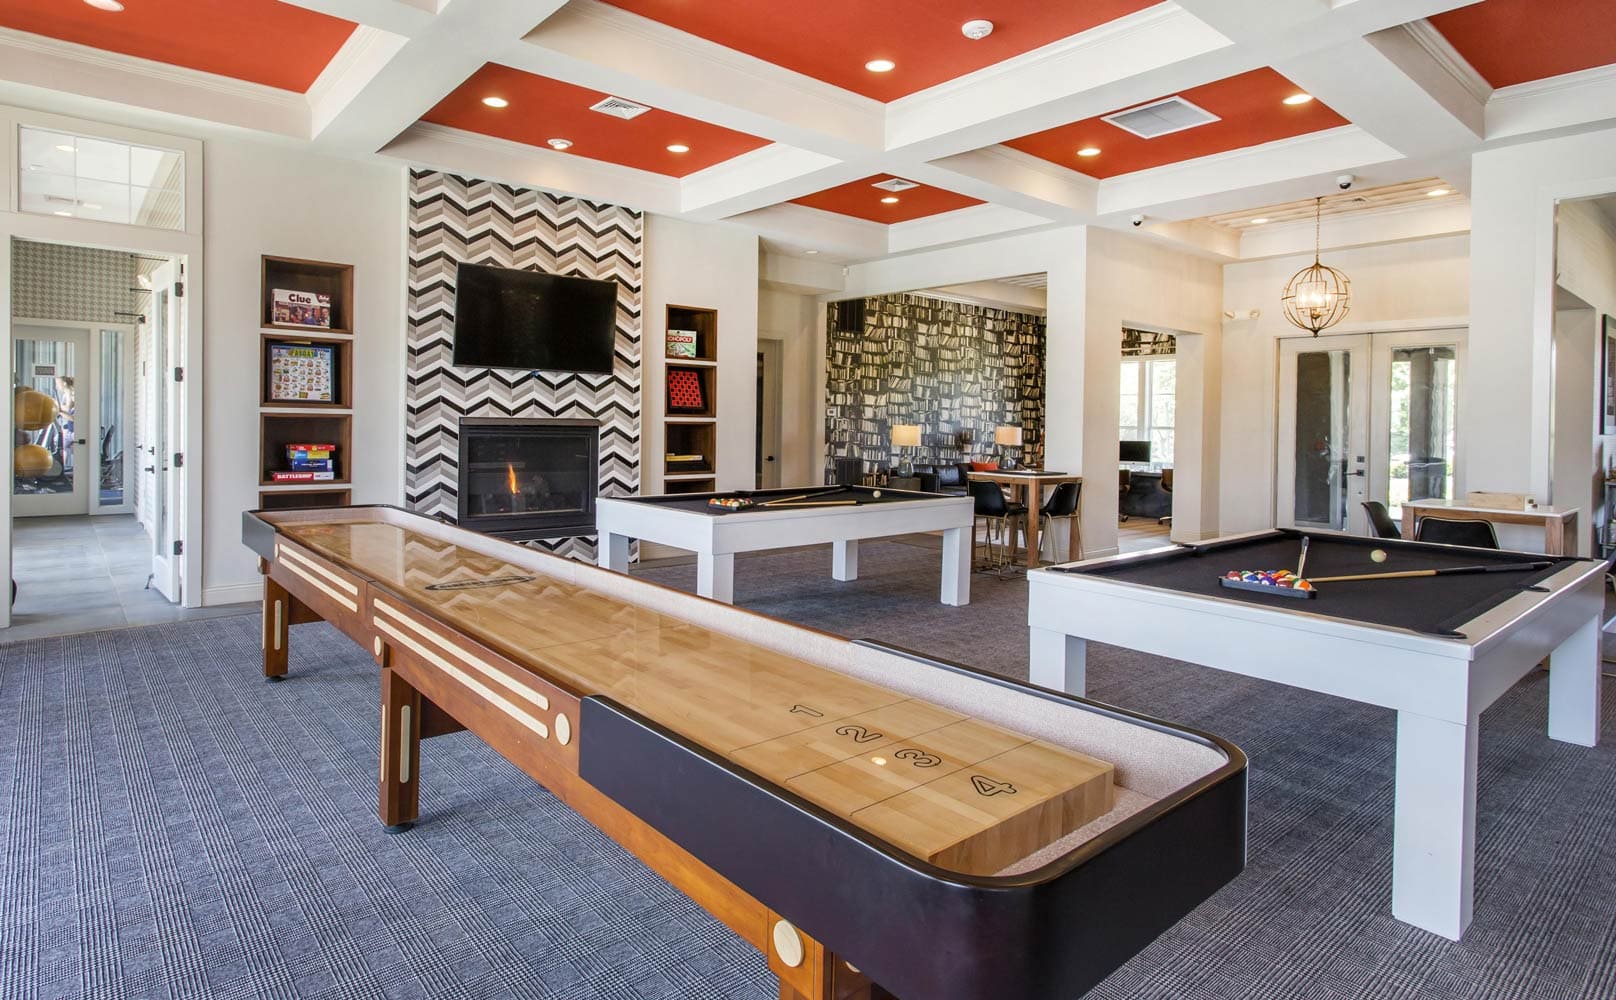 Game room designed by Annette Jaffe Interiors in Jefferson at Westtown apartment